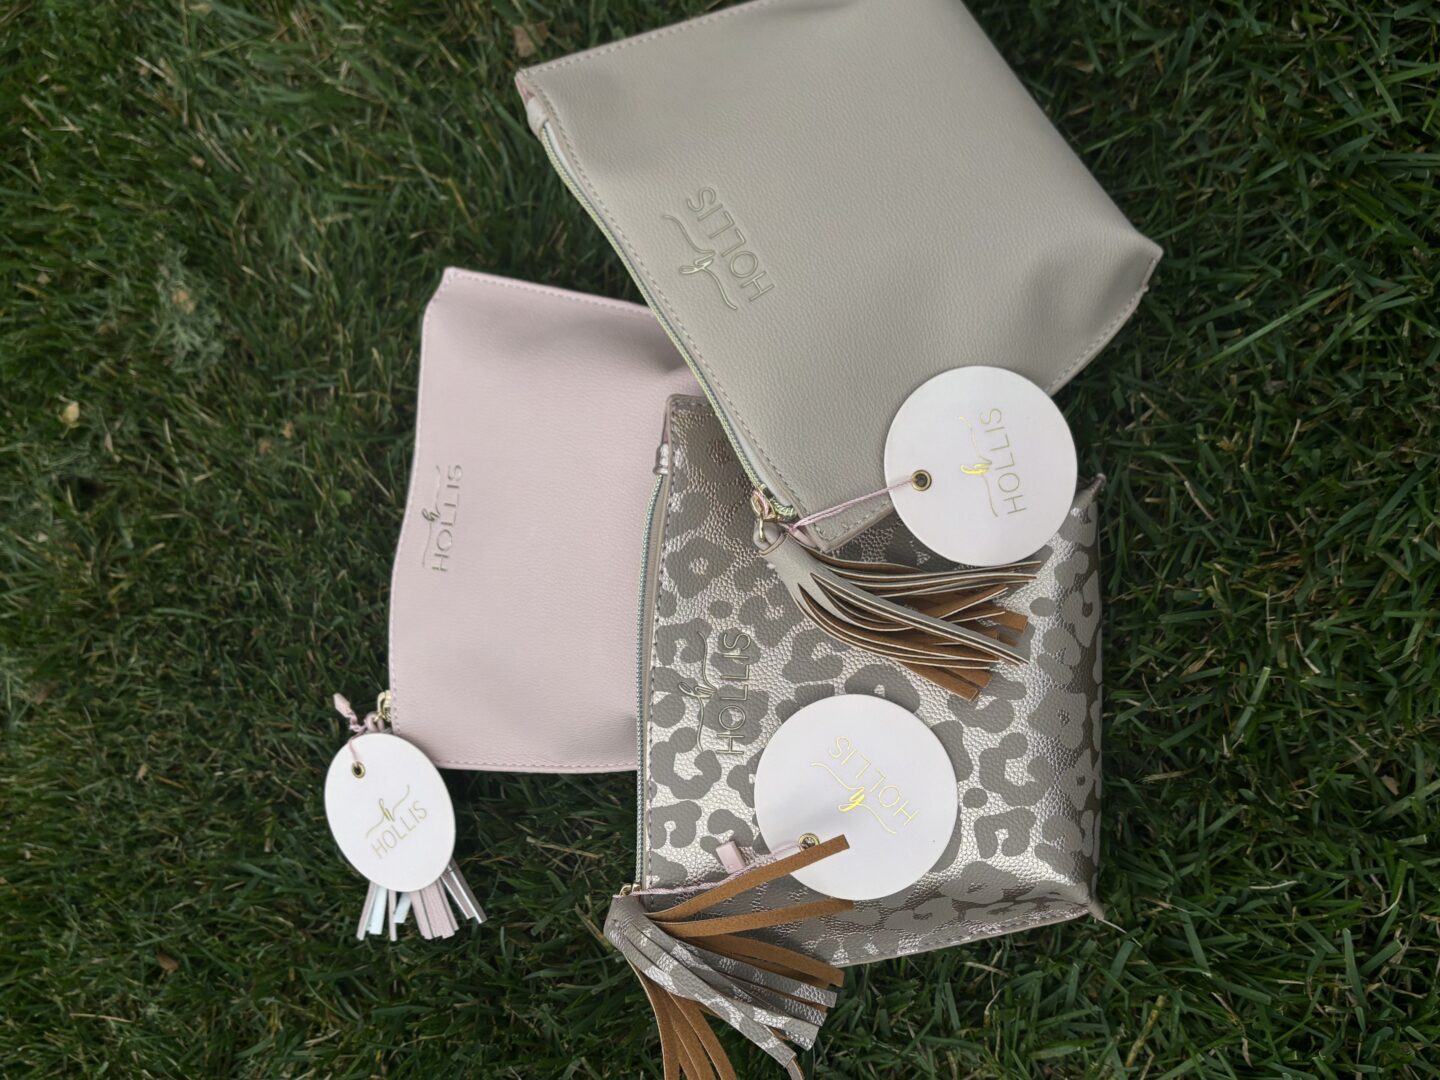 Three Hollis Chic Makeup Travel Bags with tags on them laying on the grass.